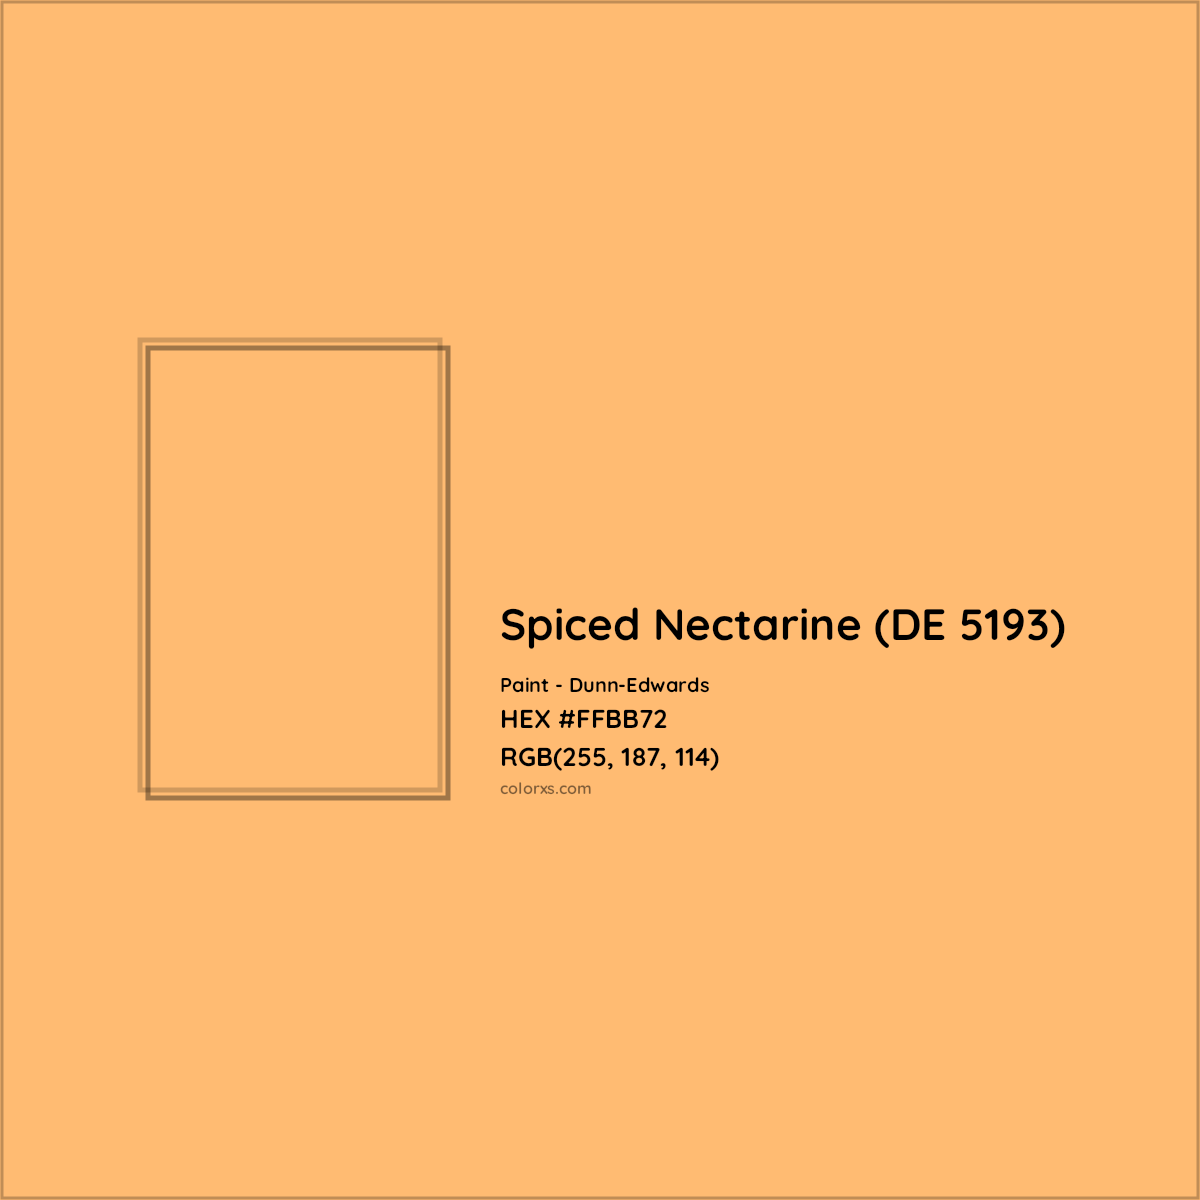 HEX #FFBB72 Spiced Nectarine (DE 5193) Paint Dunn-Edwards - Color Code